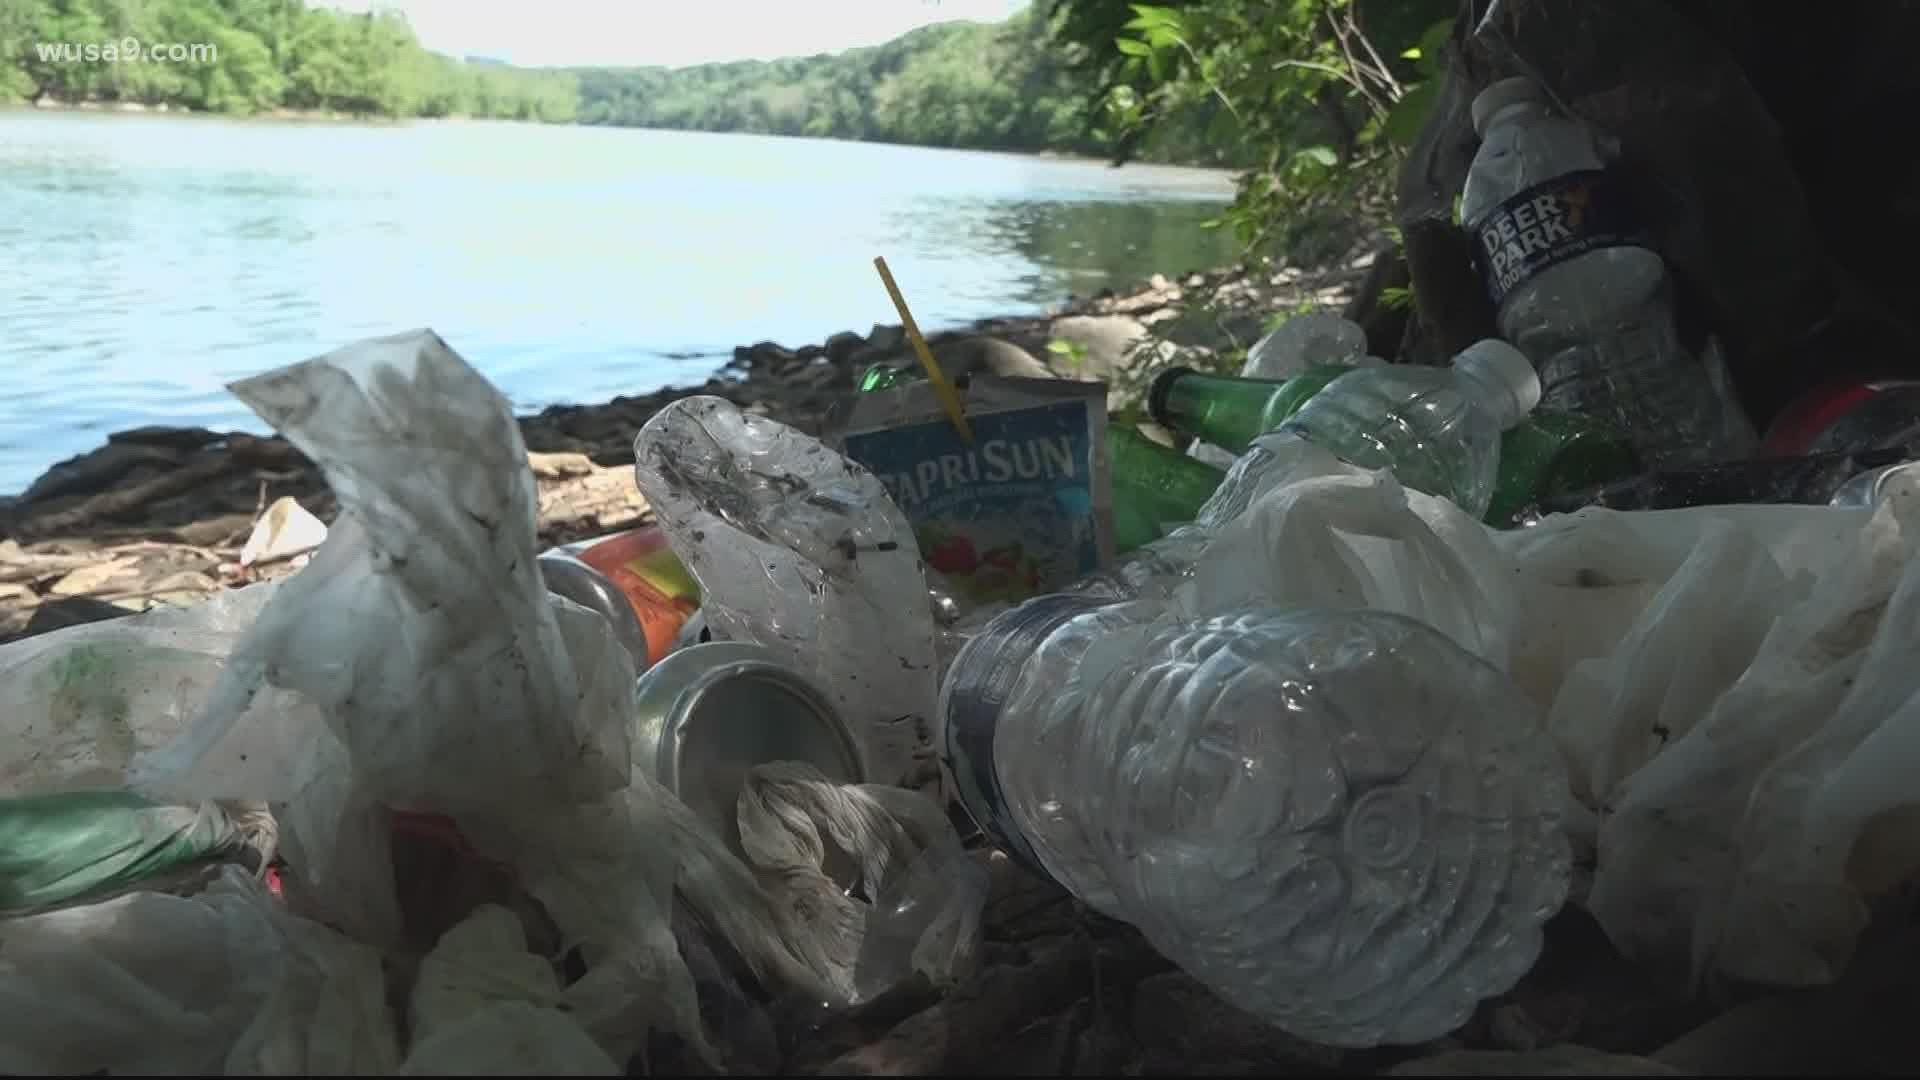 National Park Service tells clean up groups it can't pick up the trash volunteers collect due to COVID-19 impacts on operations.